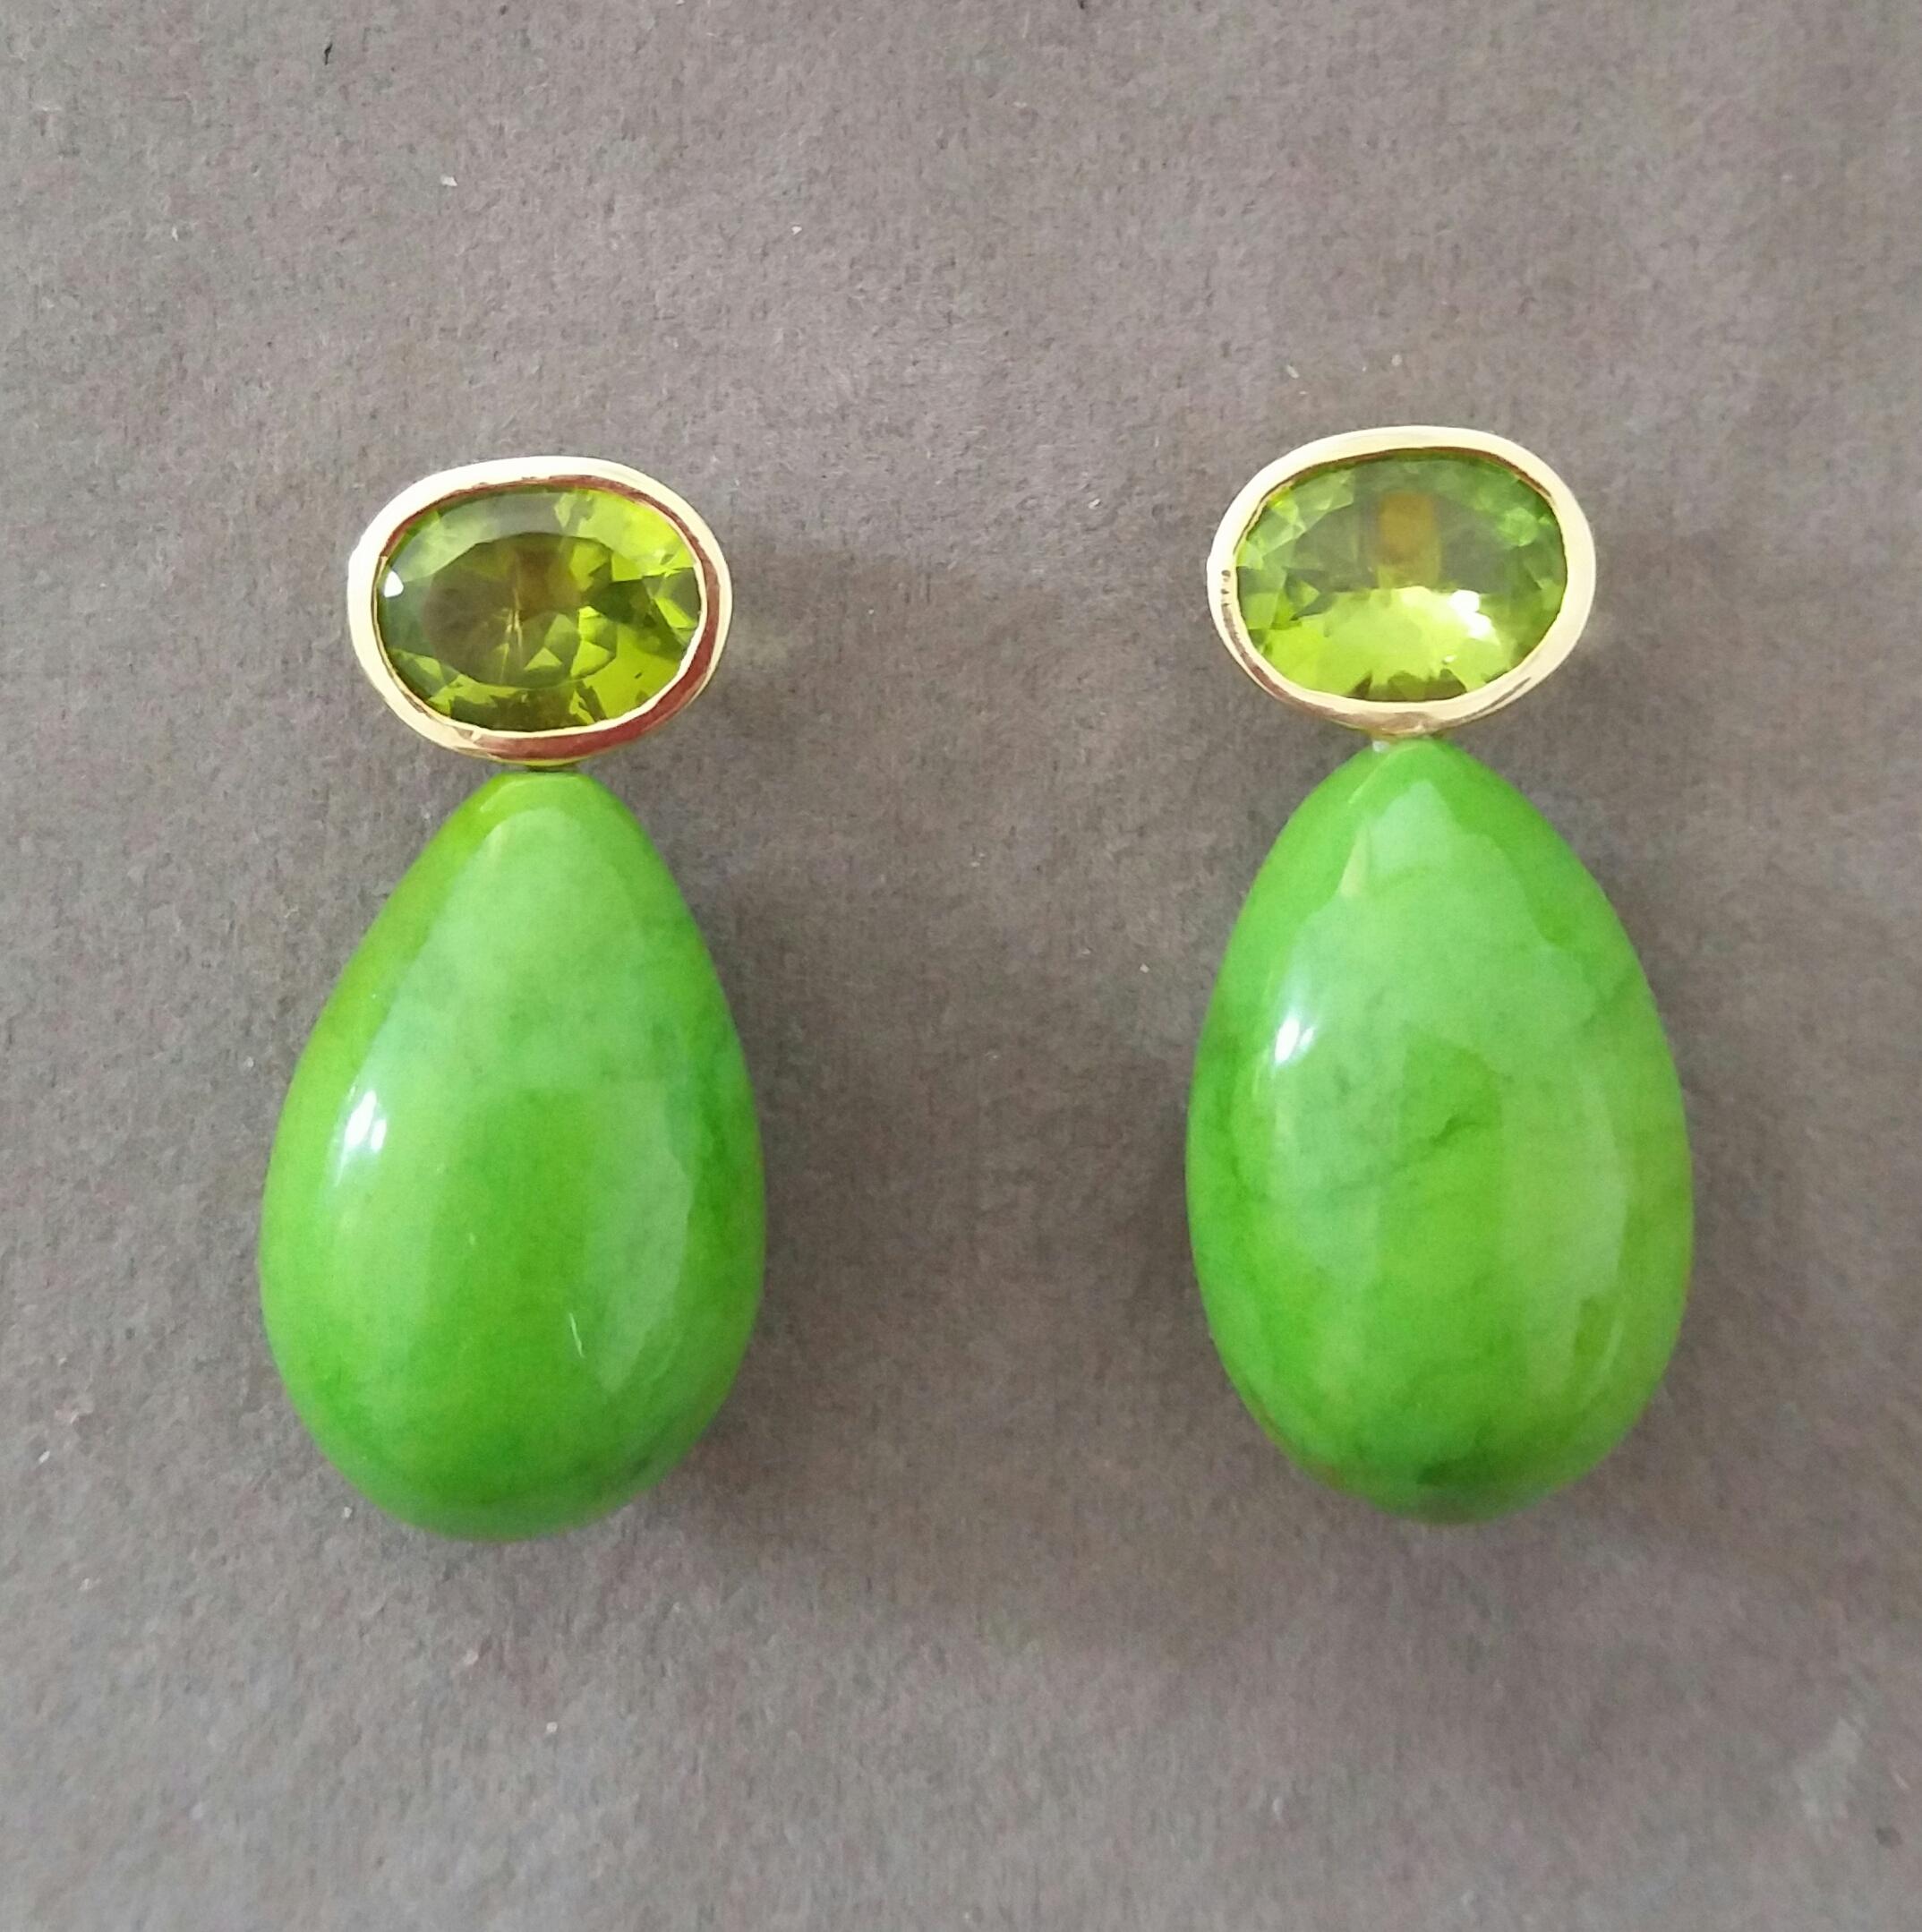 Simple chic stud earrings with a pair of Oval Cut Peridots measuring 8mm x10 mm set in solid 14 Kt. yellow gold on the top and in the lower parts 2 Turkmenistan Green Turquoise Round Drops measuring 14x22 mm.
In 1978 our workshop started in Italy to